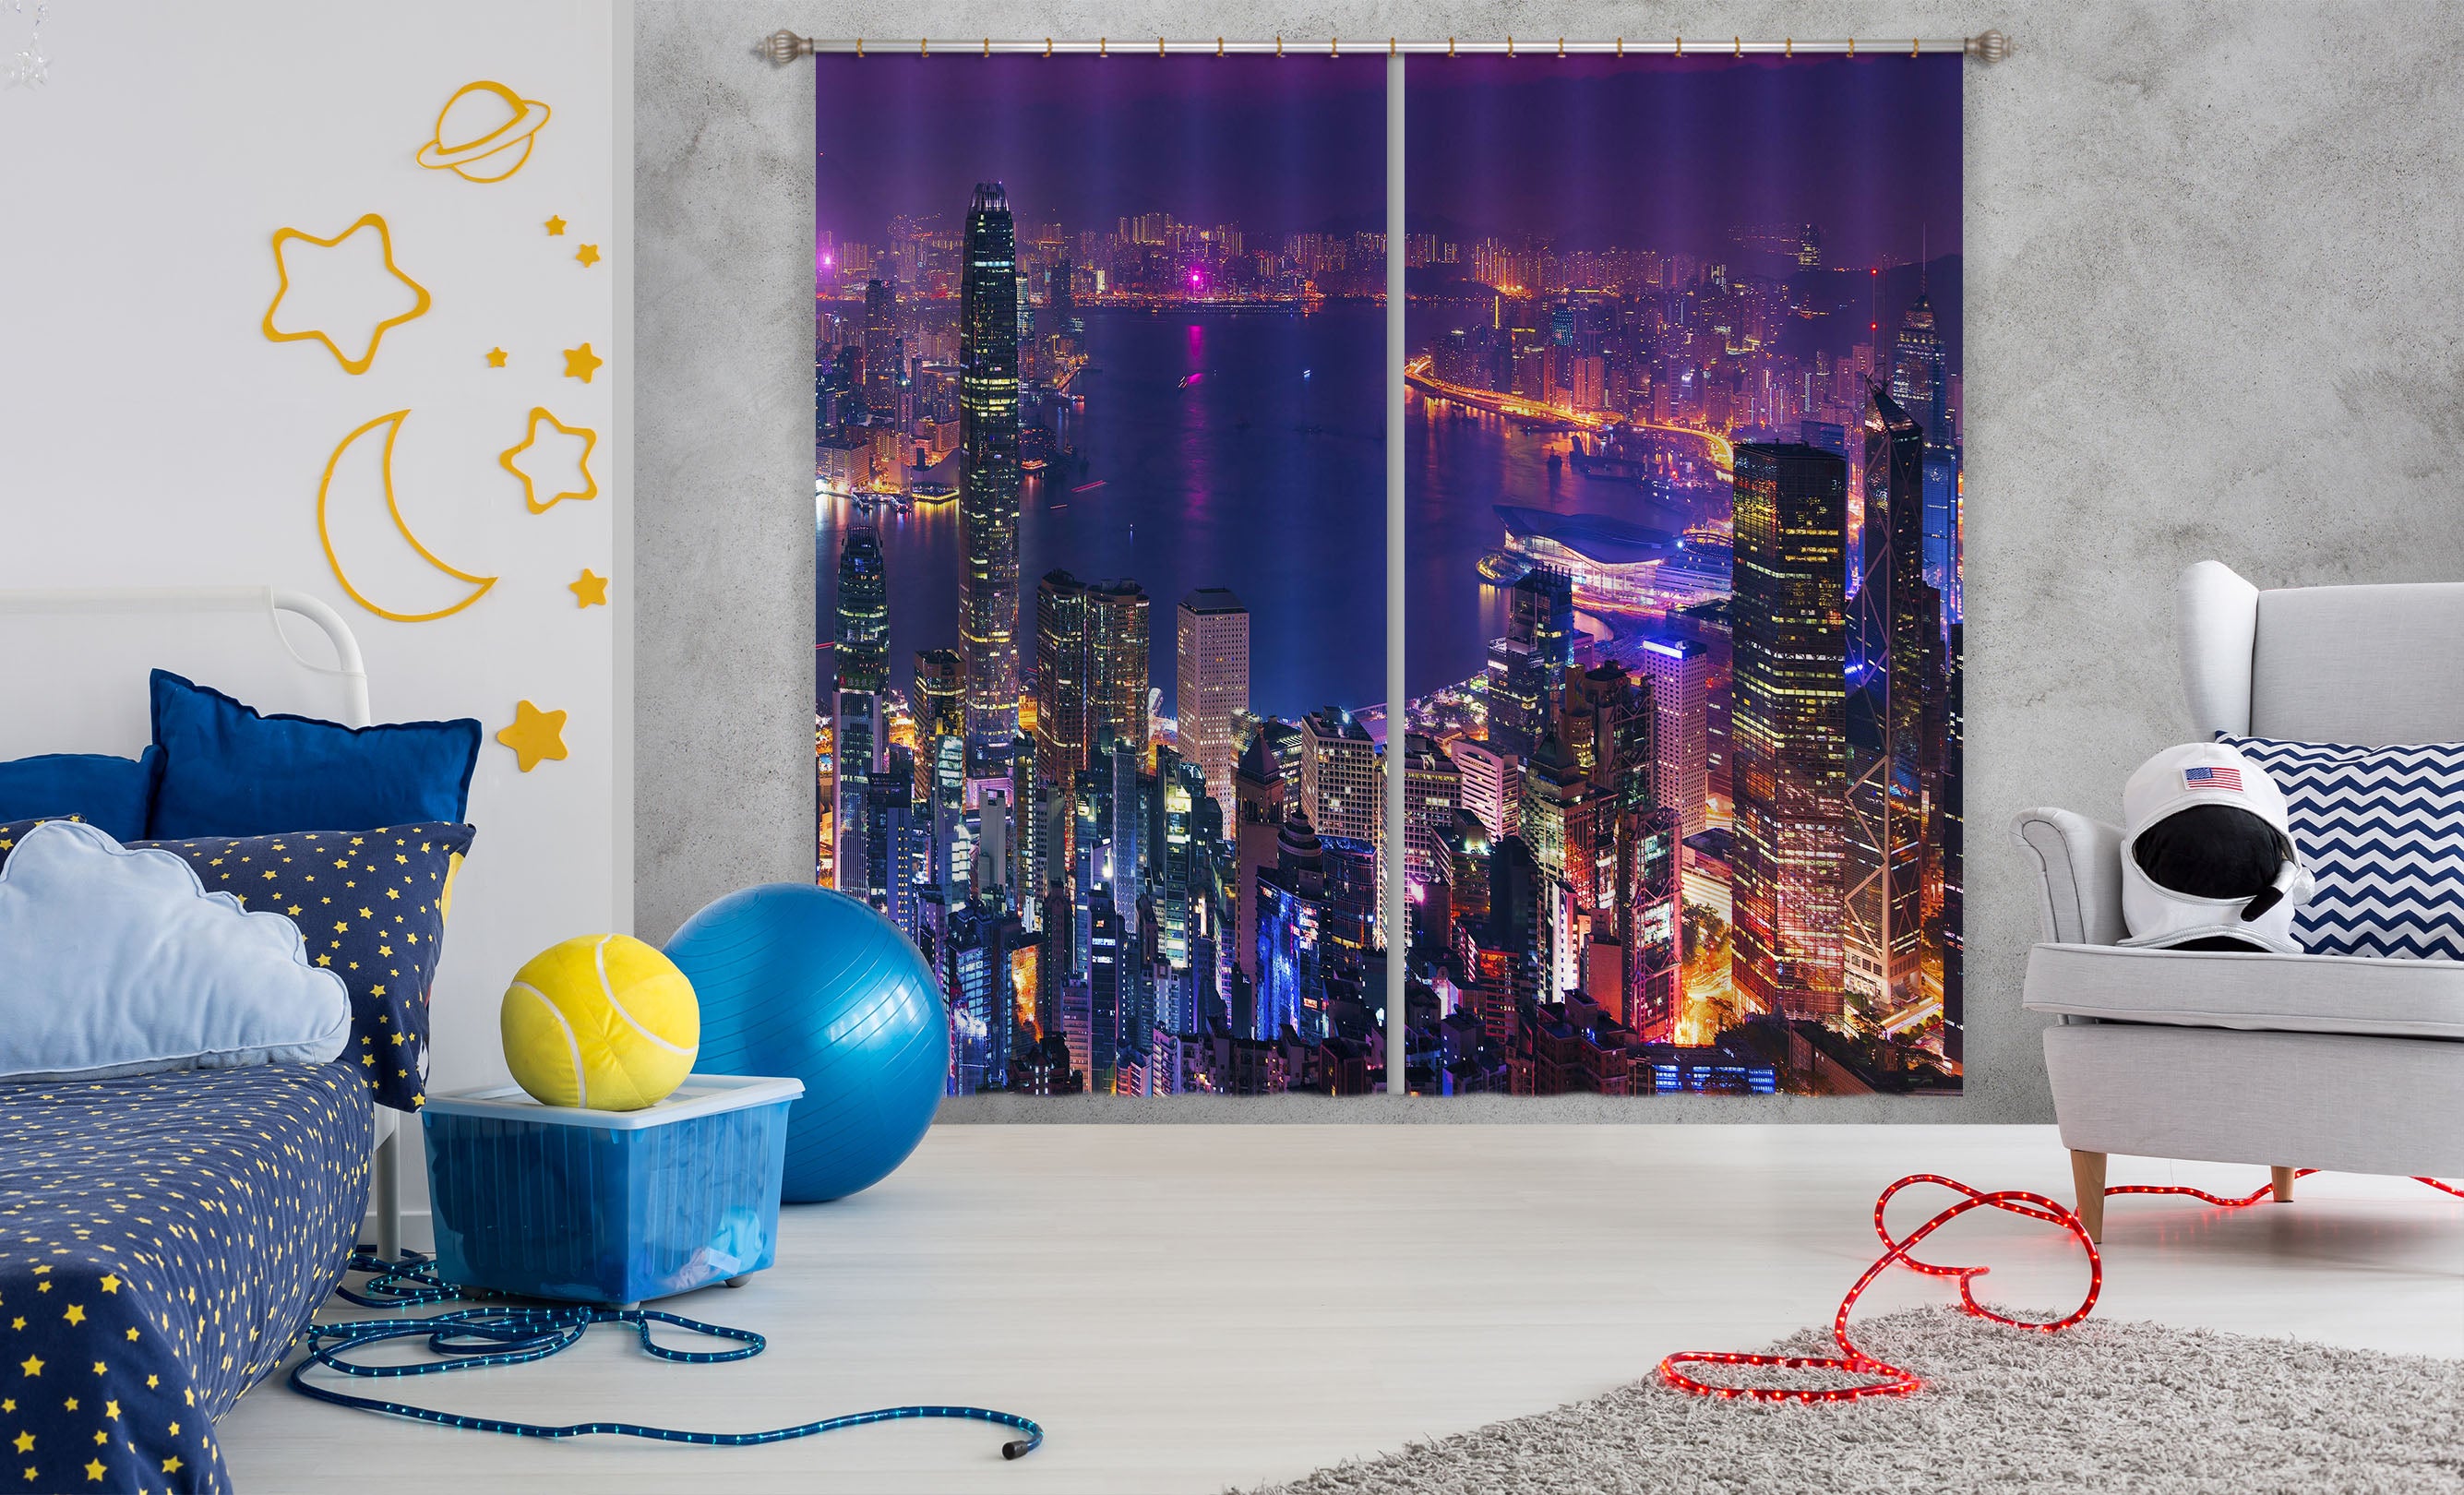 3D City Lights 180 Marco Carmassi Curtain Curtains Drapes